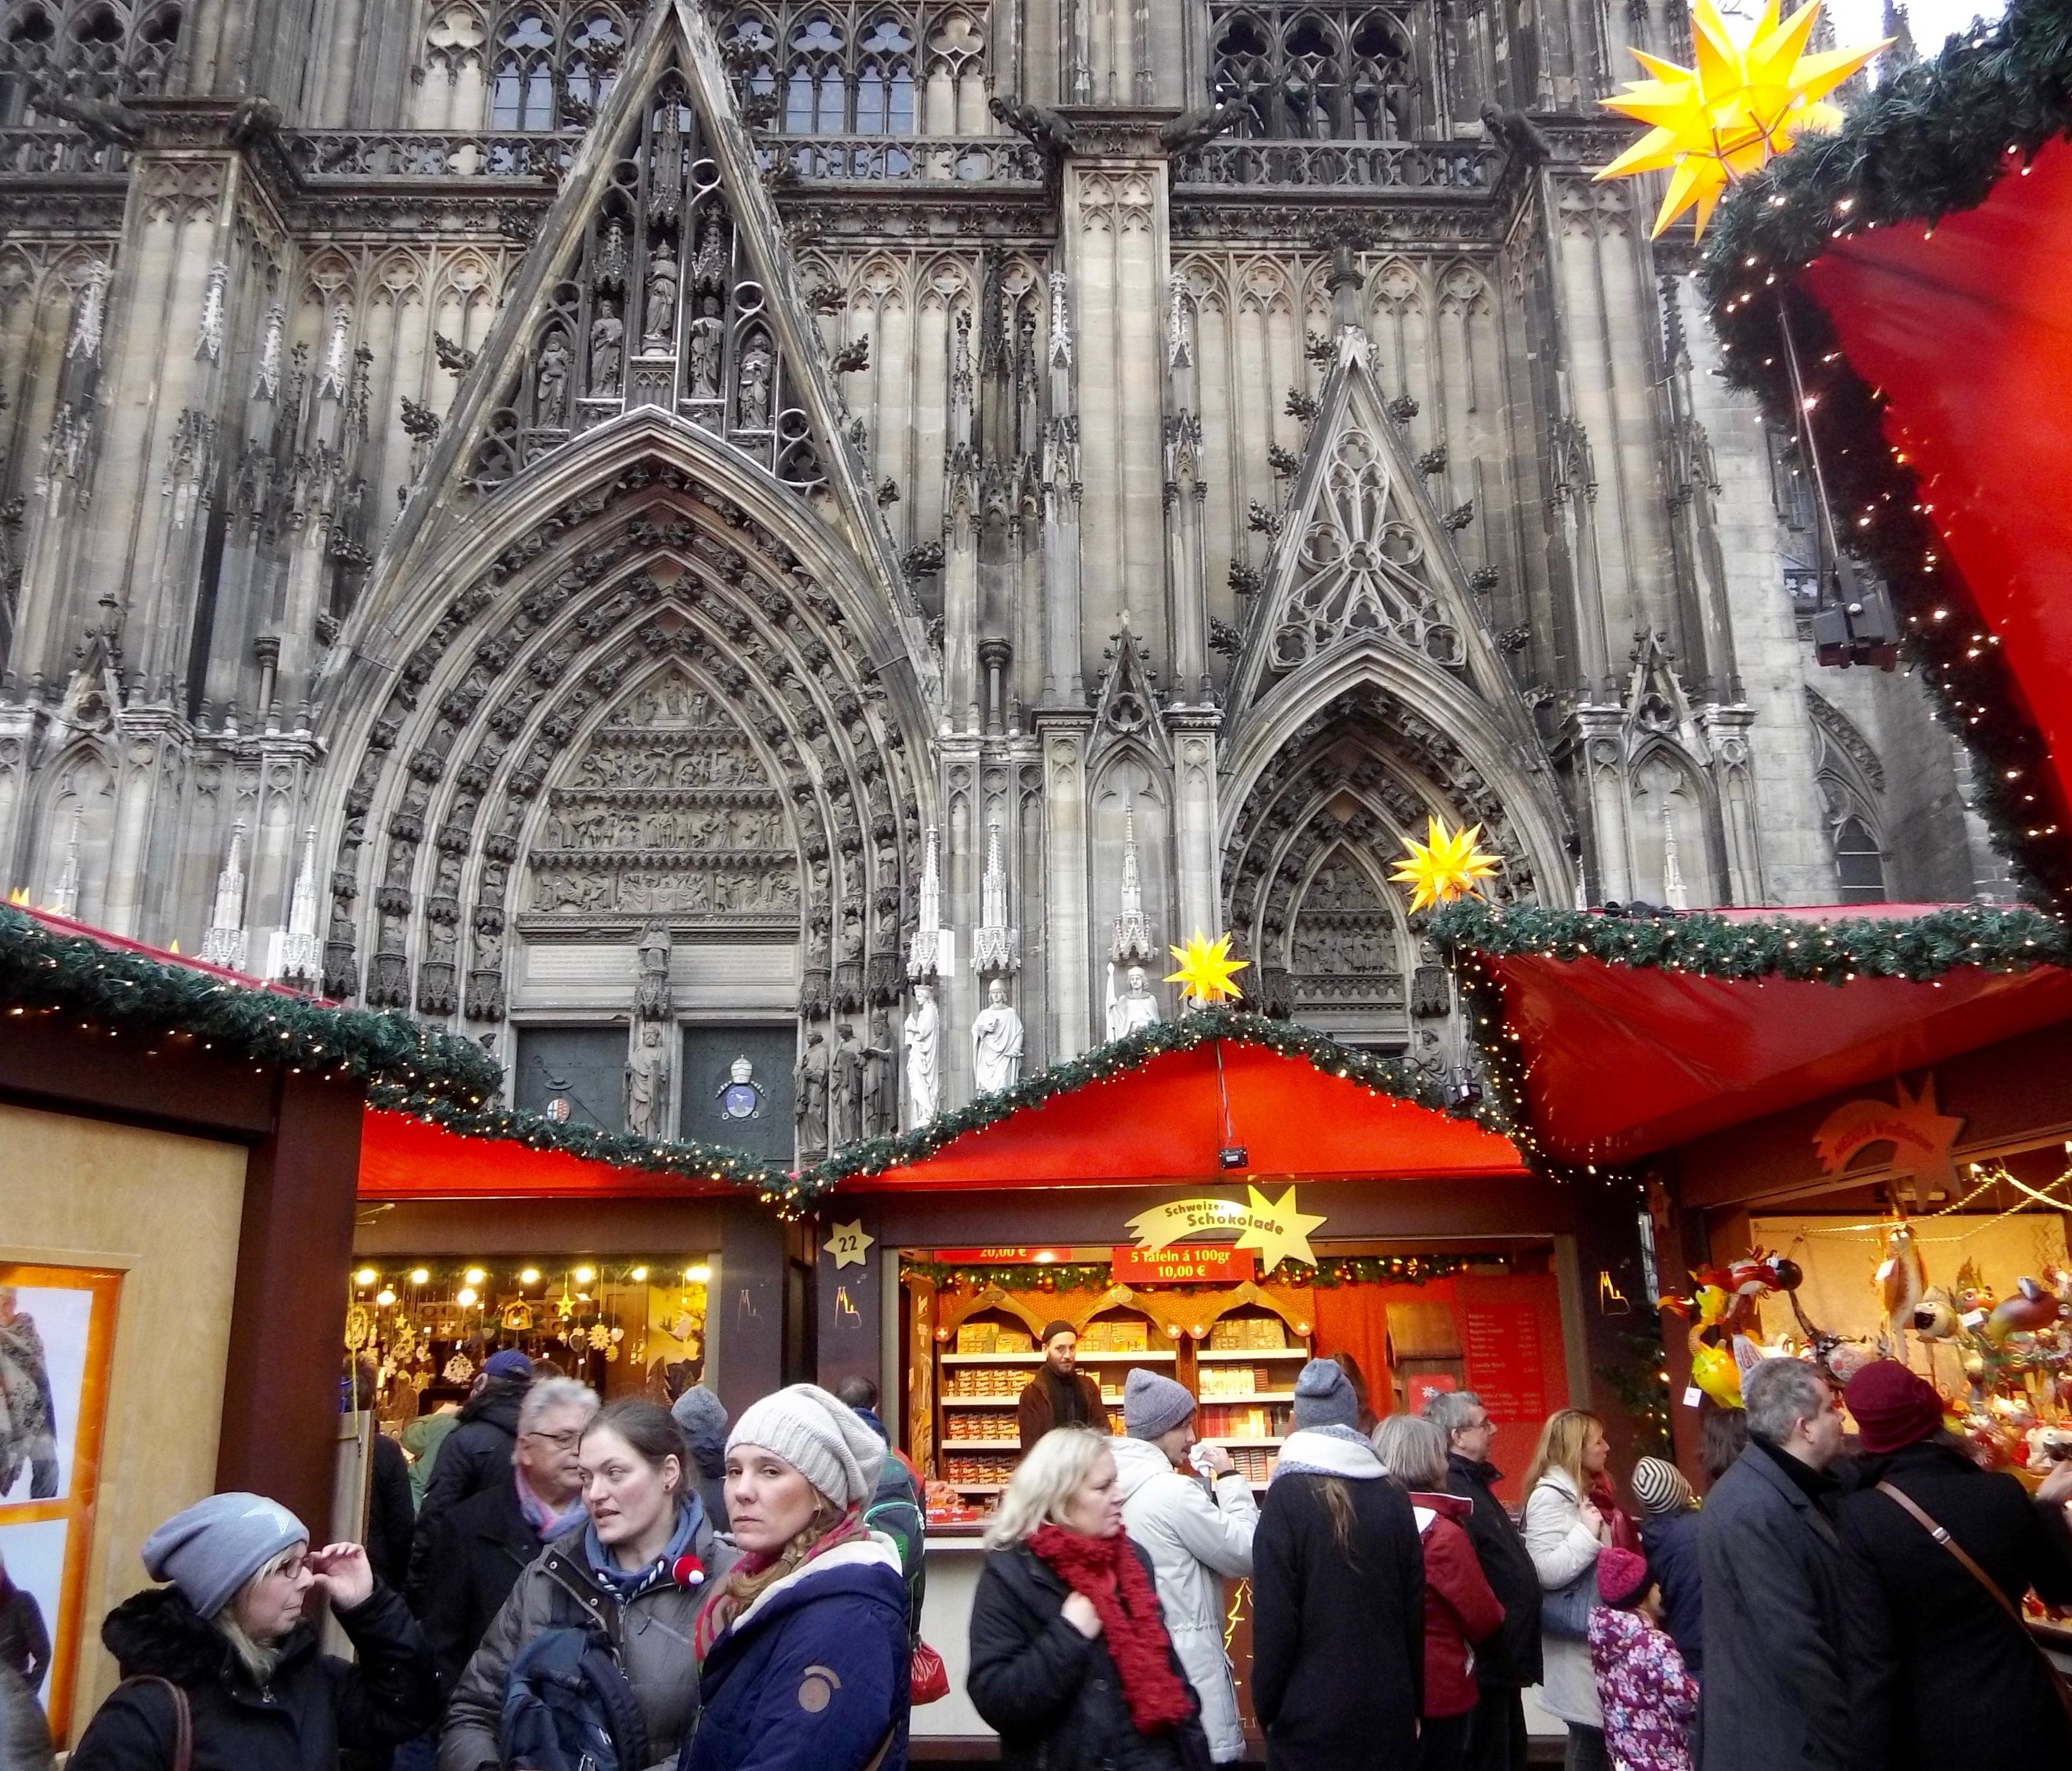 The Cologne Cathedral looms large at the Weihnachtsmarkt am Kölner Dom (Cathedral Christmas Market) in Cologne, Germany.